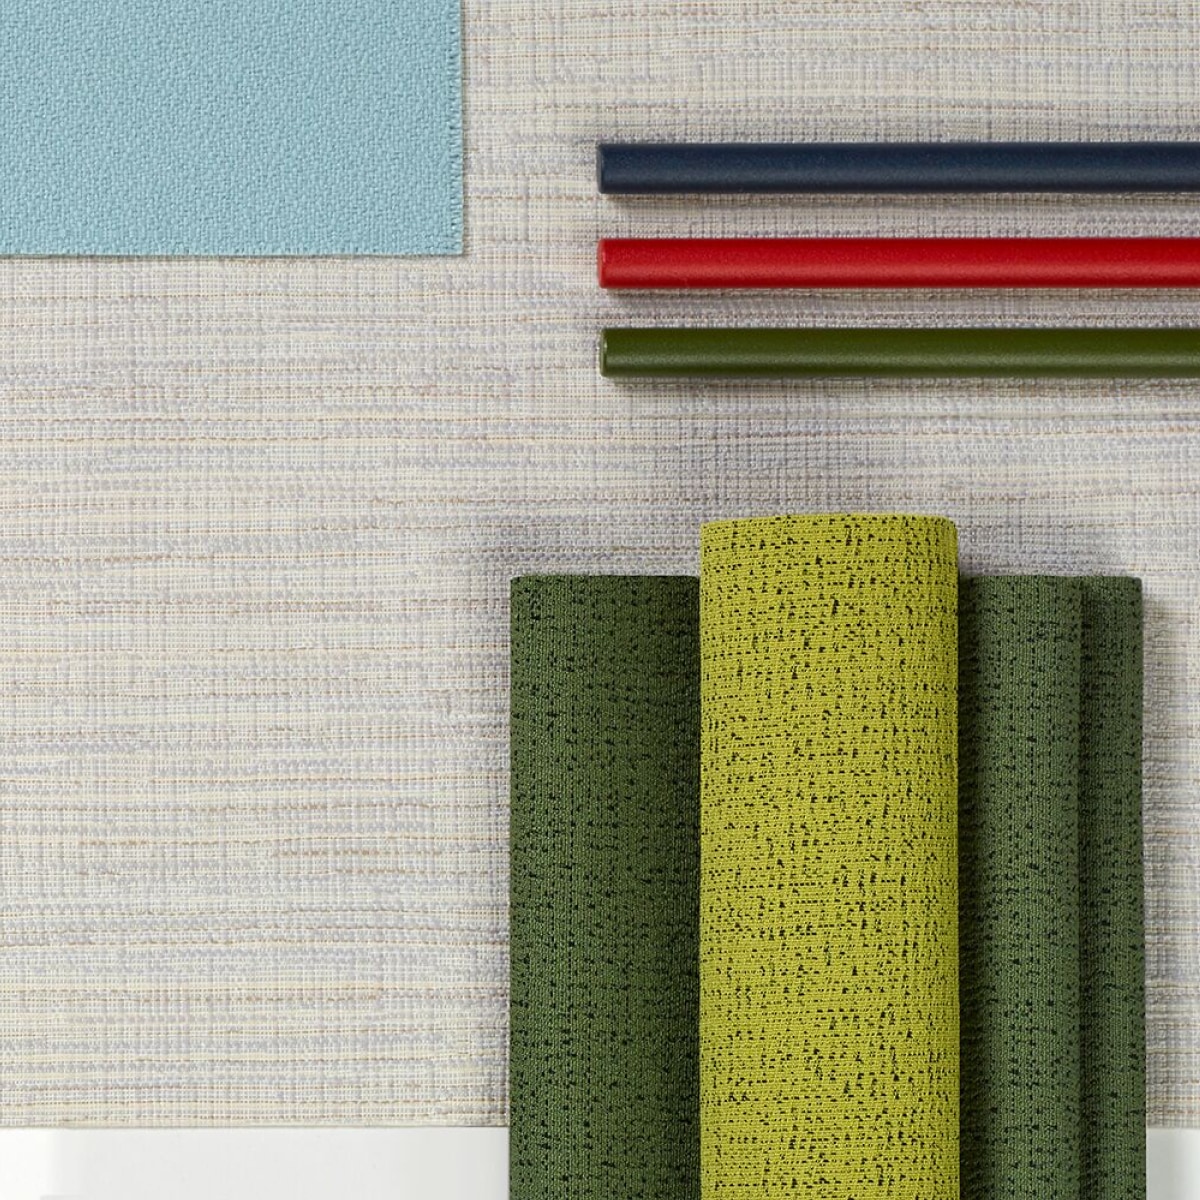 A top view of multiple, folded colourful and neutral fabrics.